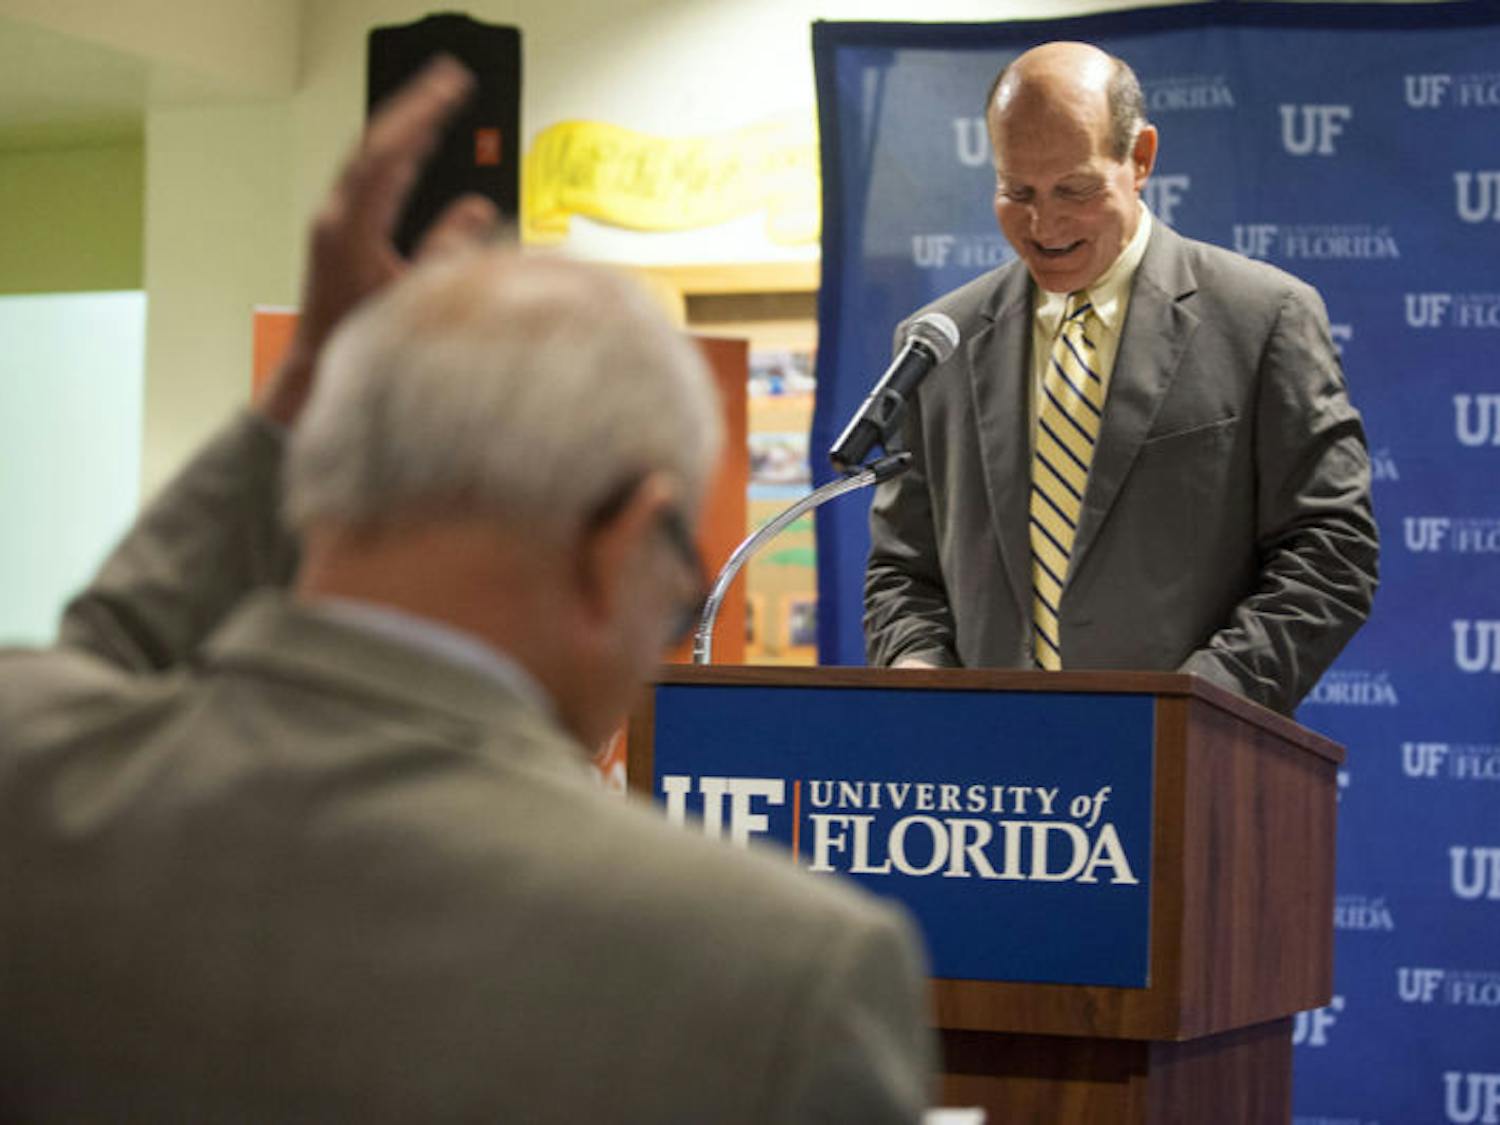 UF President Bernie Machen acknowledges his introduction by Dave Kratzer, vice president for student affairs, at an award ceremony Wednesday morning.
&nbsp;